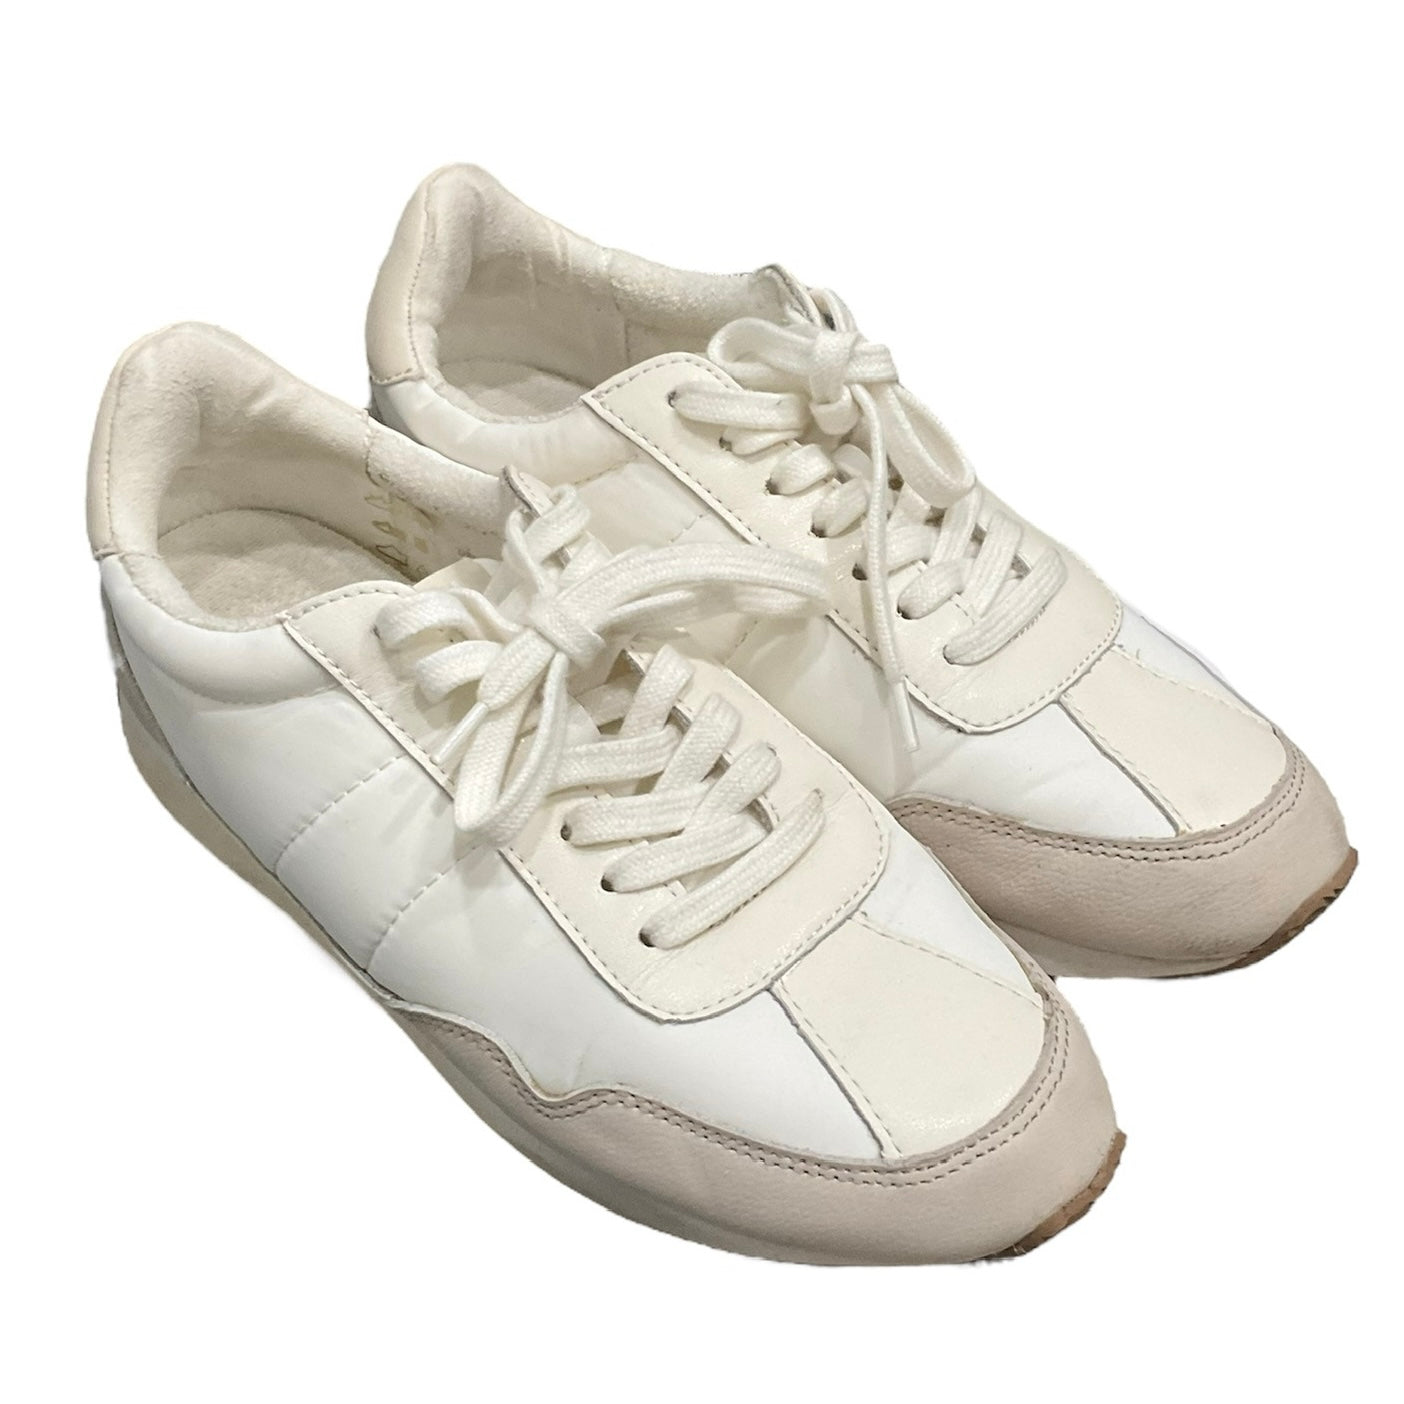 White Shoes Sneakers Madewell, Size 7.5